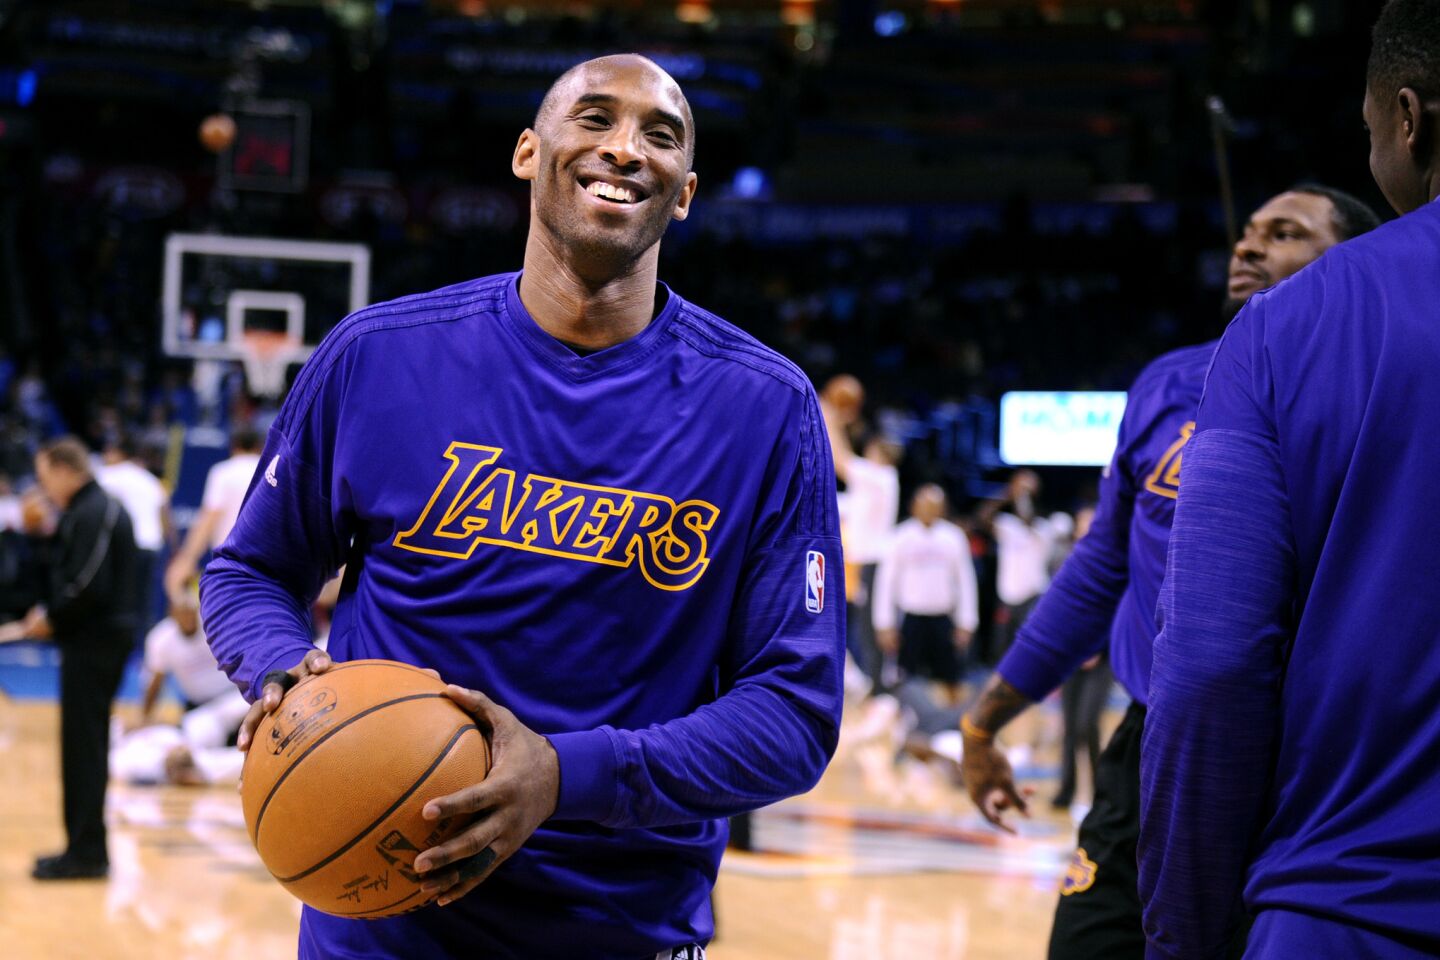 Kobe Bryant laughs with teammates before a game against the Thunder in Oklahoma City on April 11.